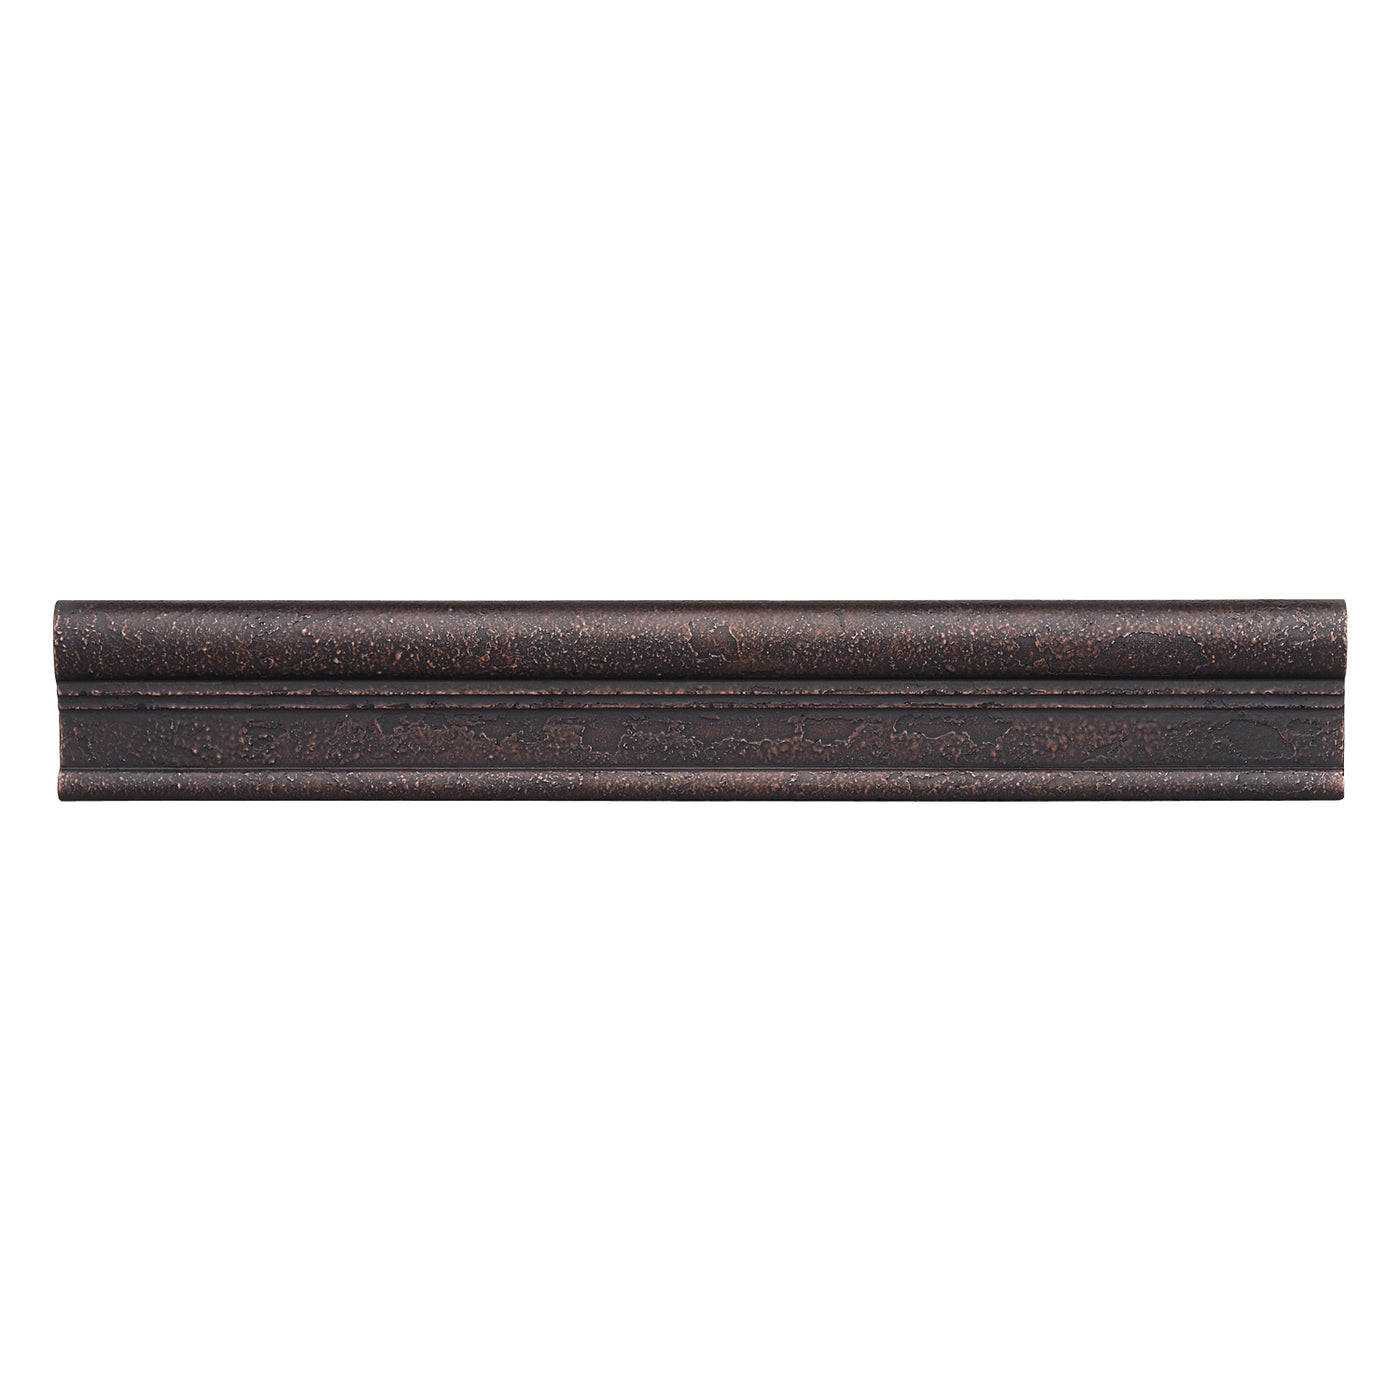 Questech Traditional 2" x 12" Metal Ogee